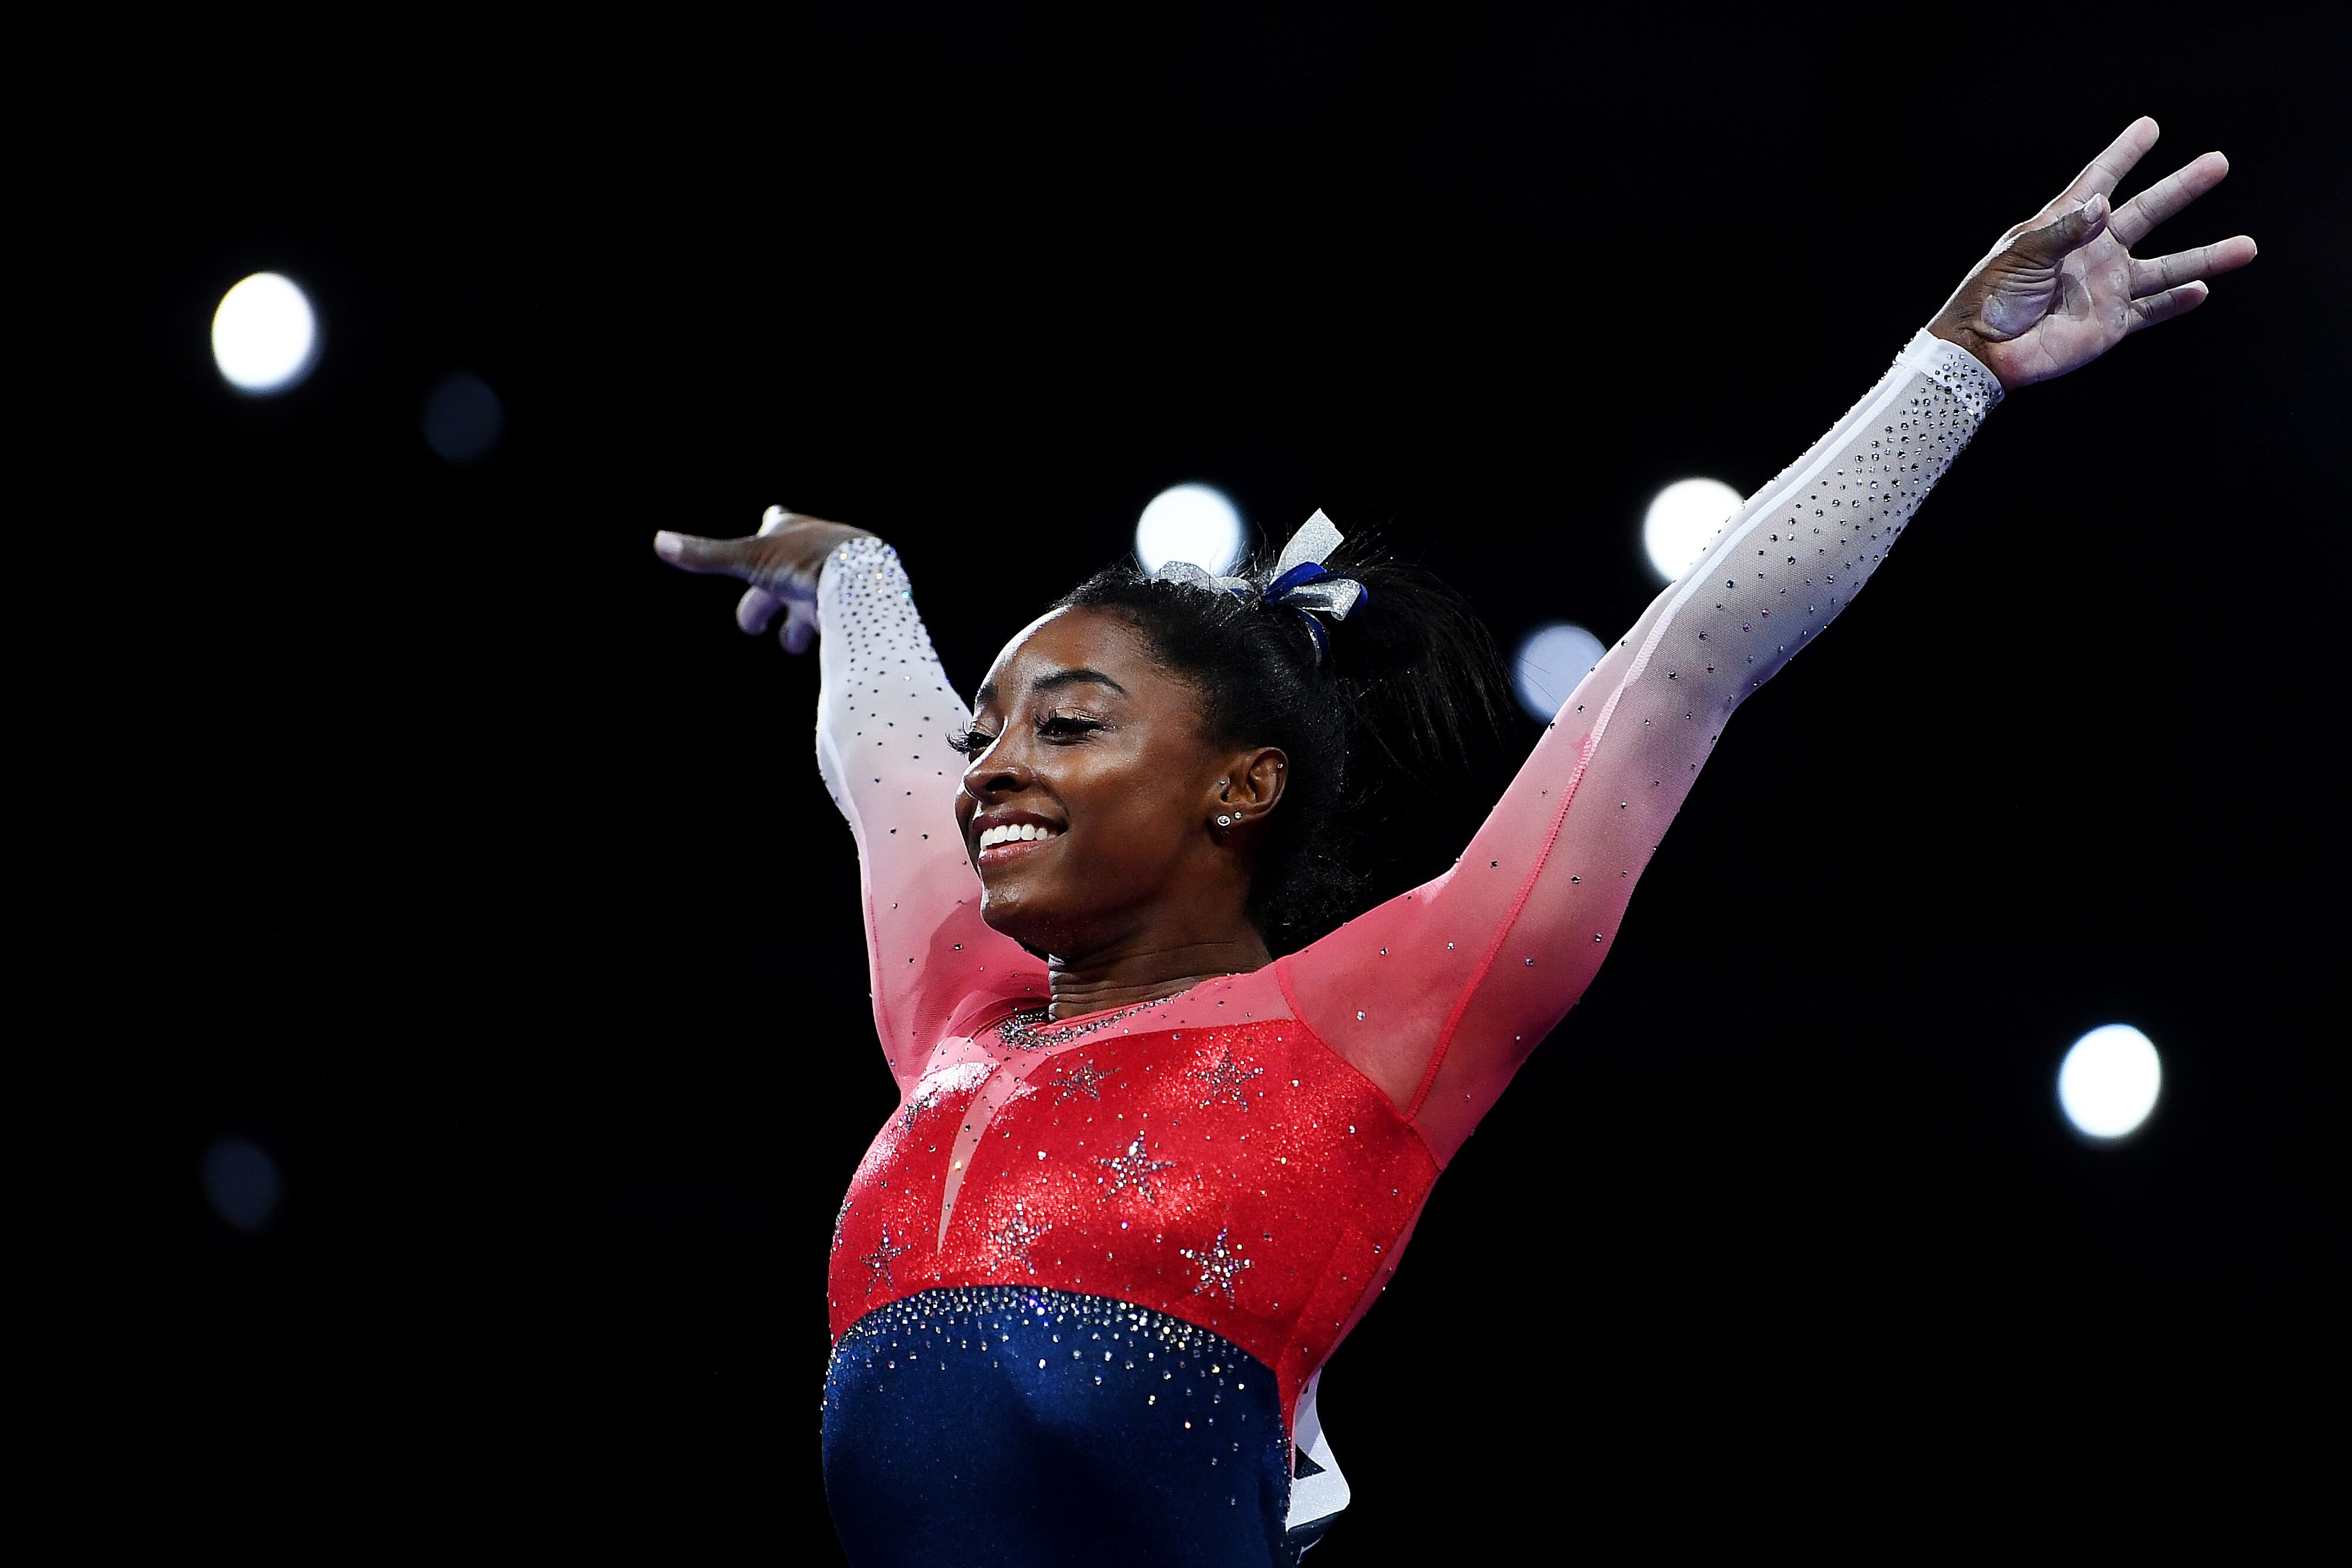 Simone Biles shows off her moves during the FIG Artistic Gymnastics World Championships in October 2019. | Photo: Getty Images